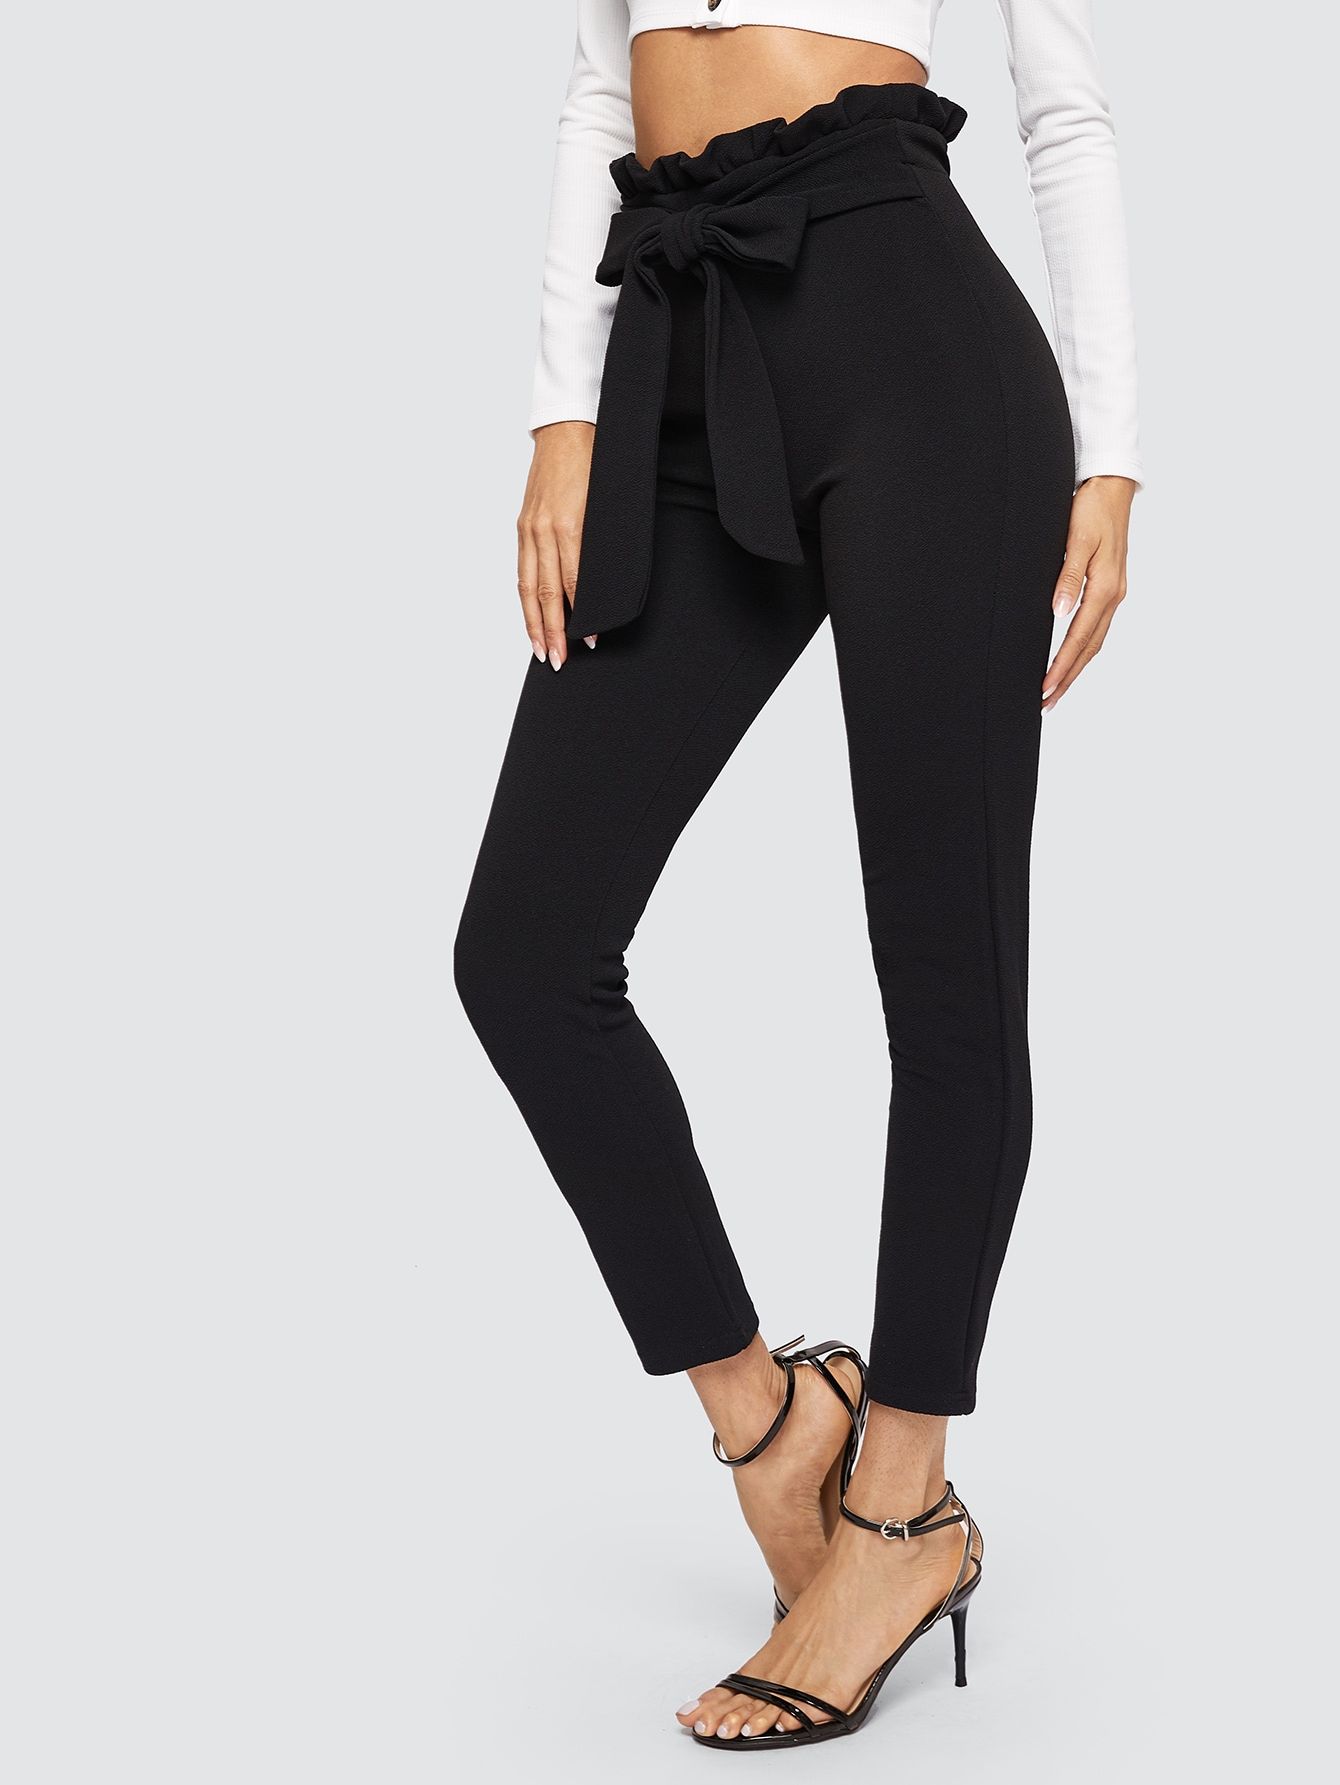 SHEIN Paperbag Waist Form Fitted Pants | SHEIN